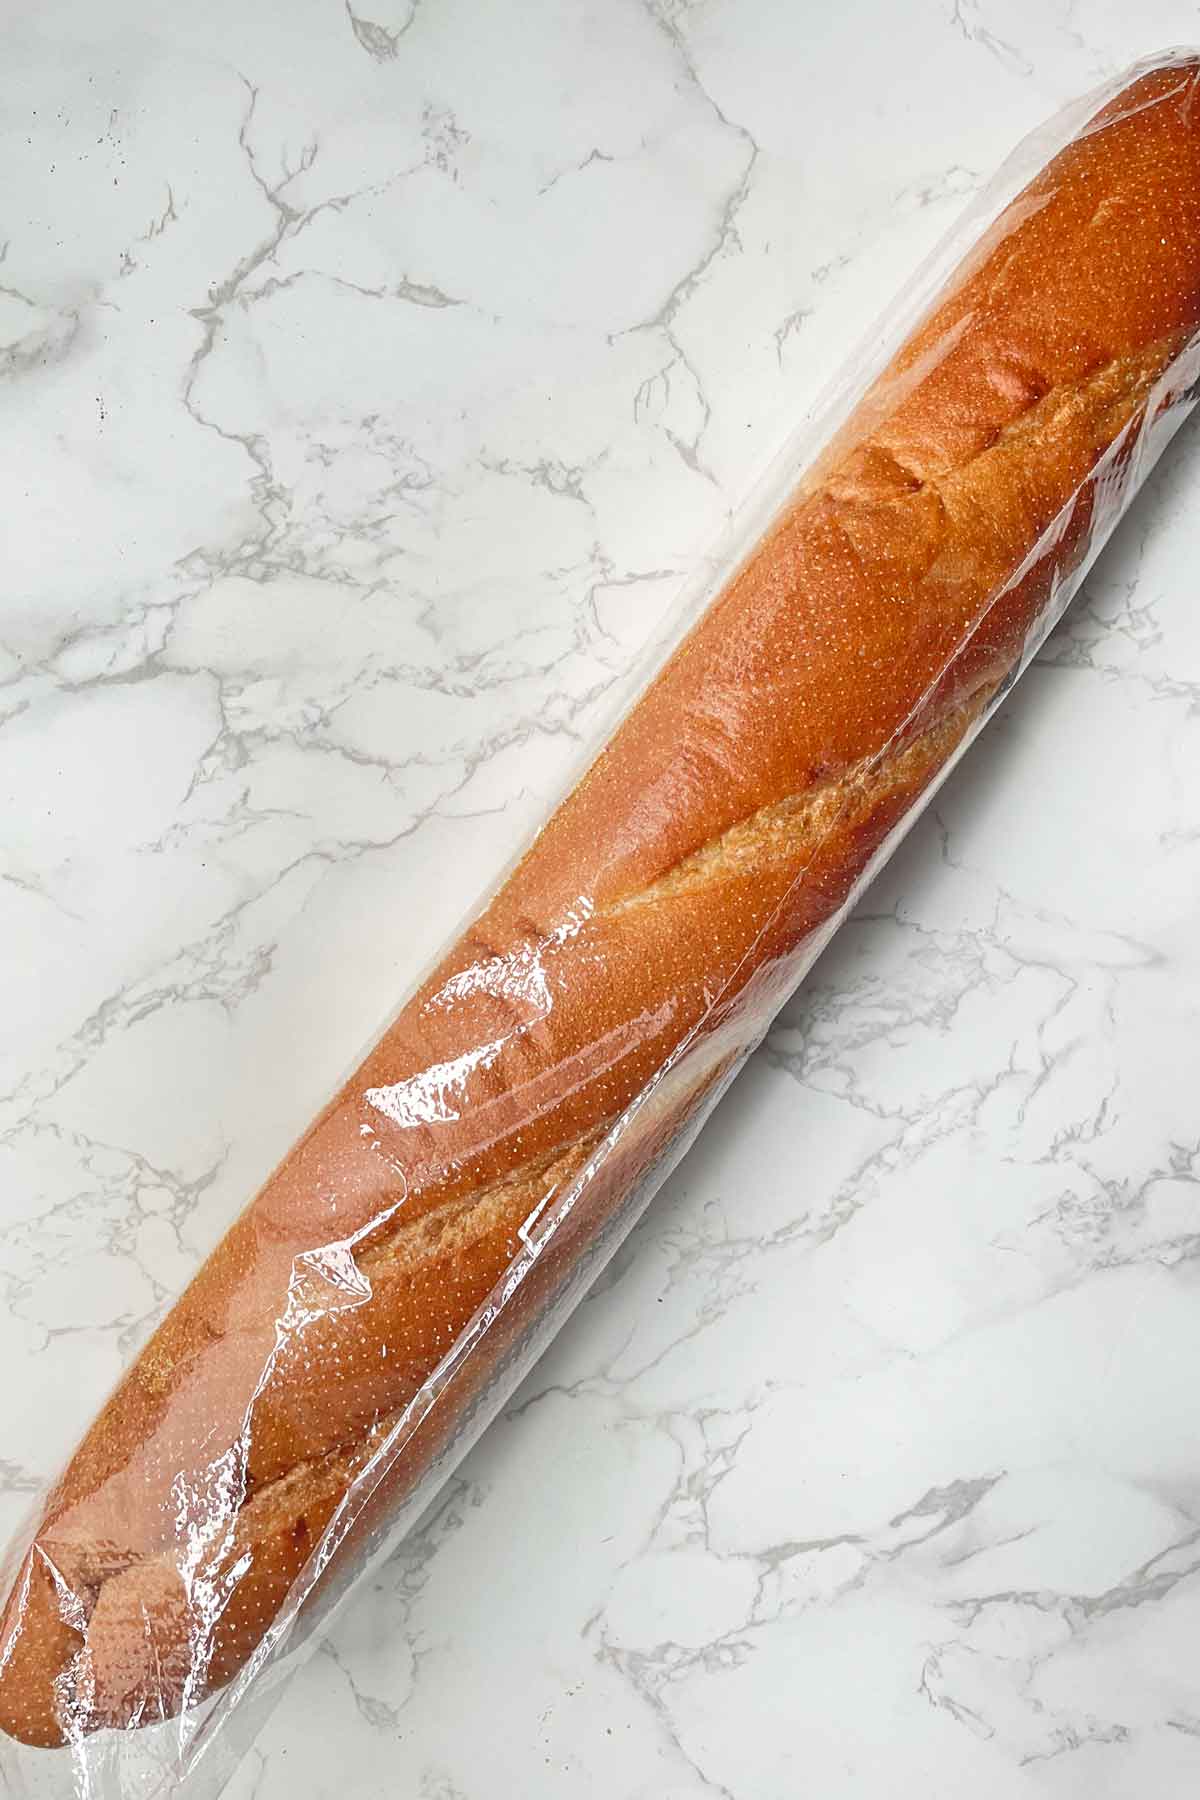 French bread baguette in plastic bag.